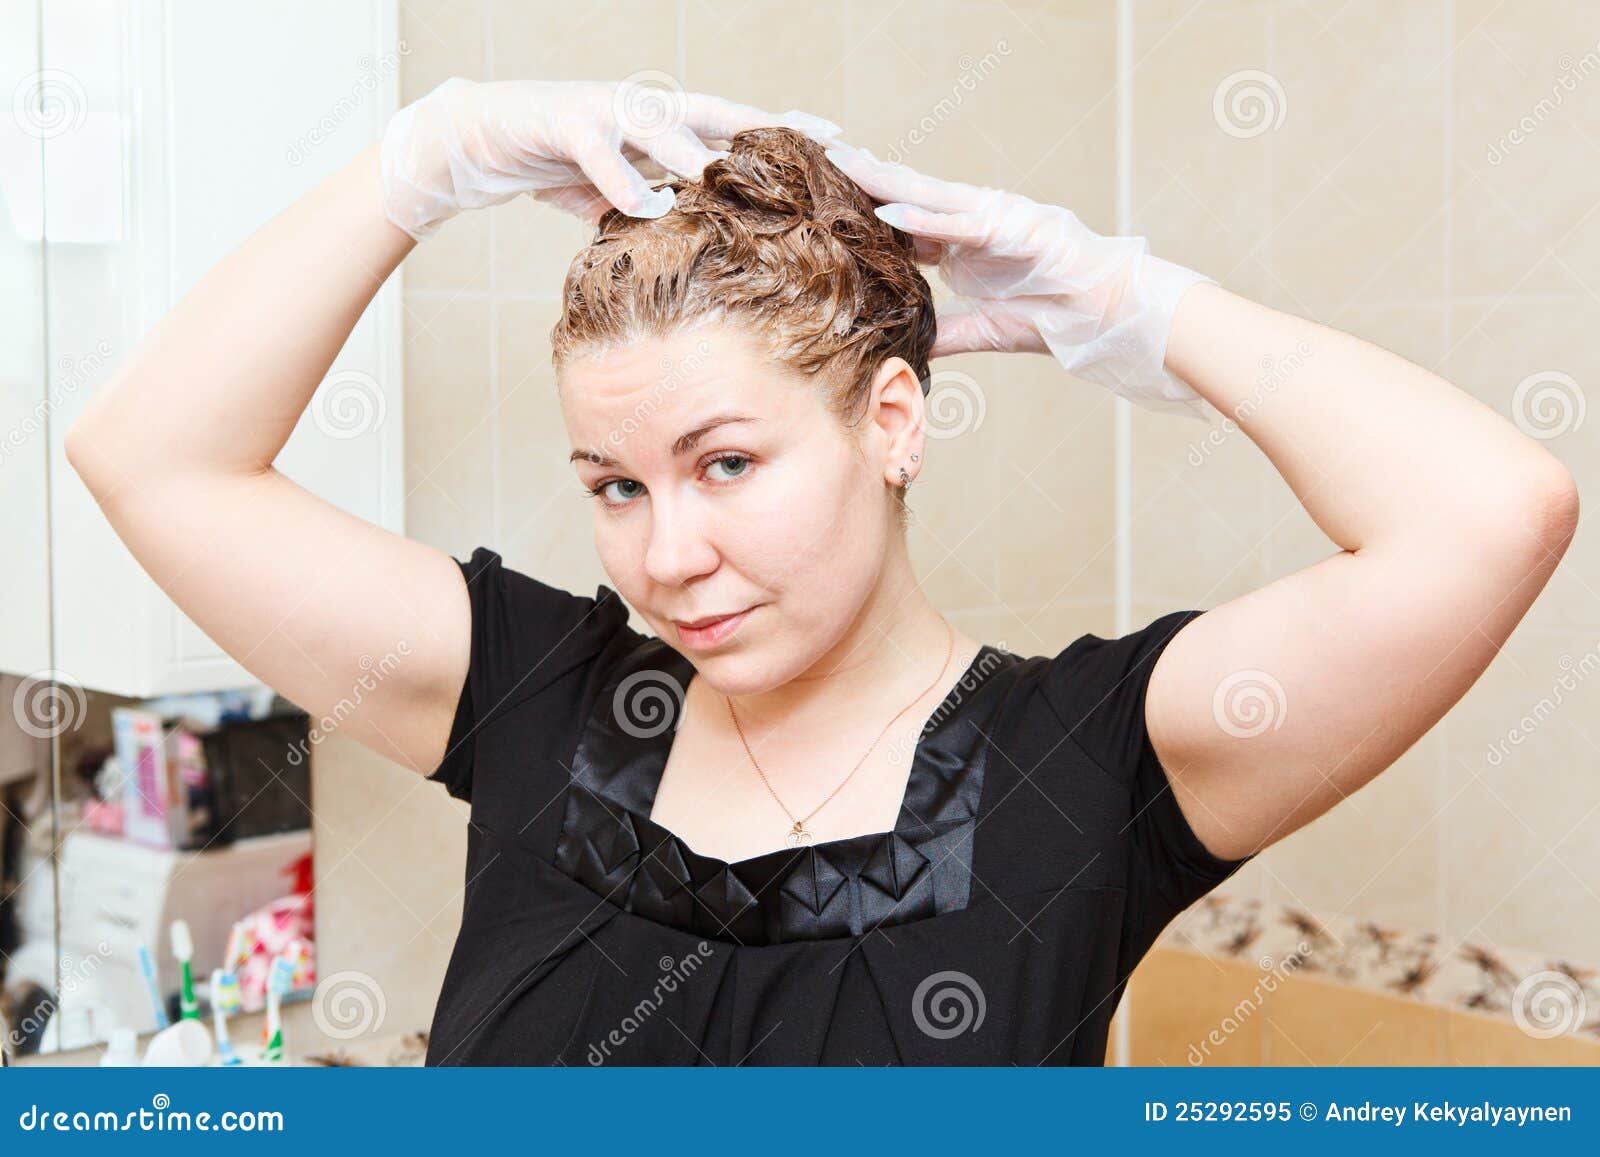 female dyeing hairs at home